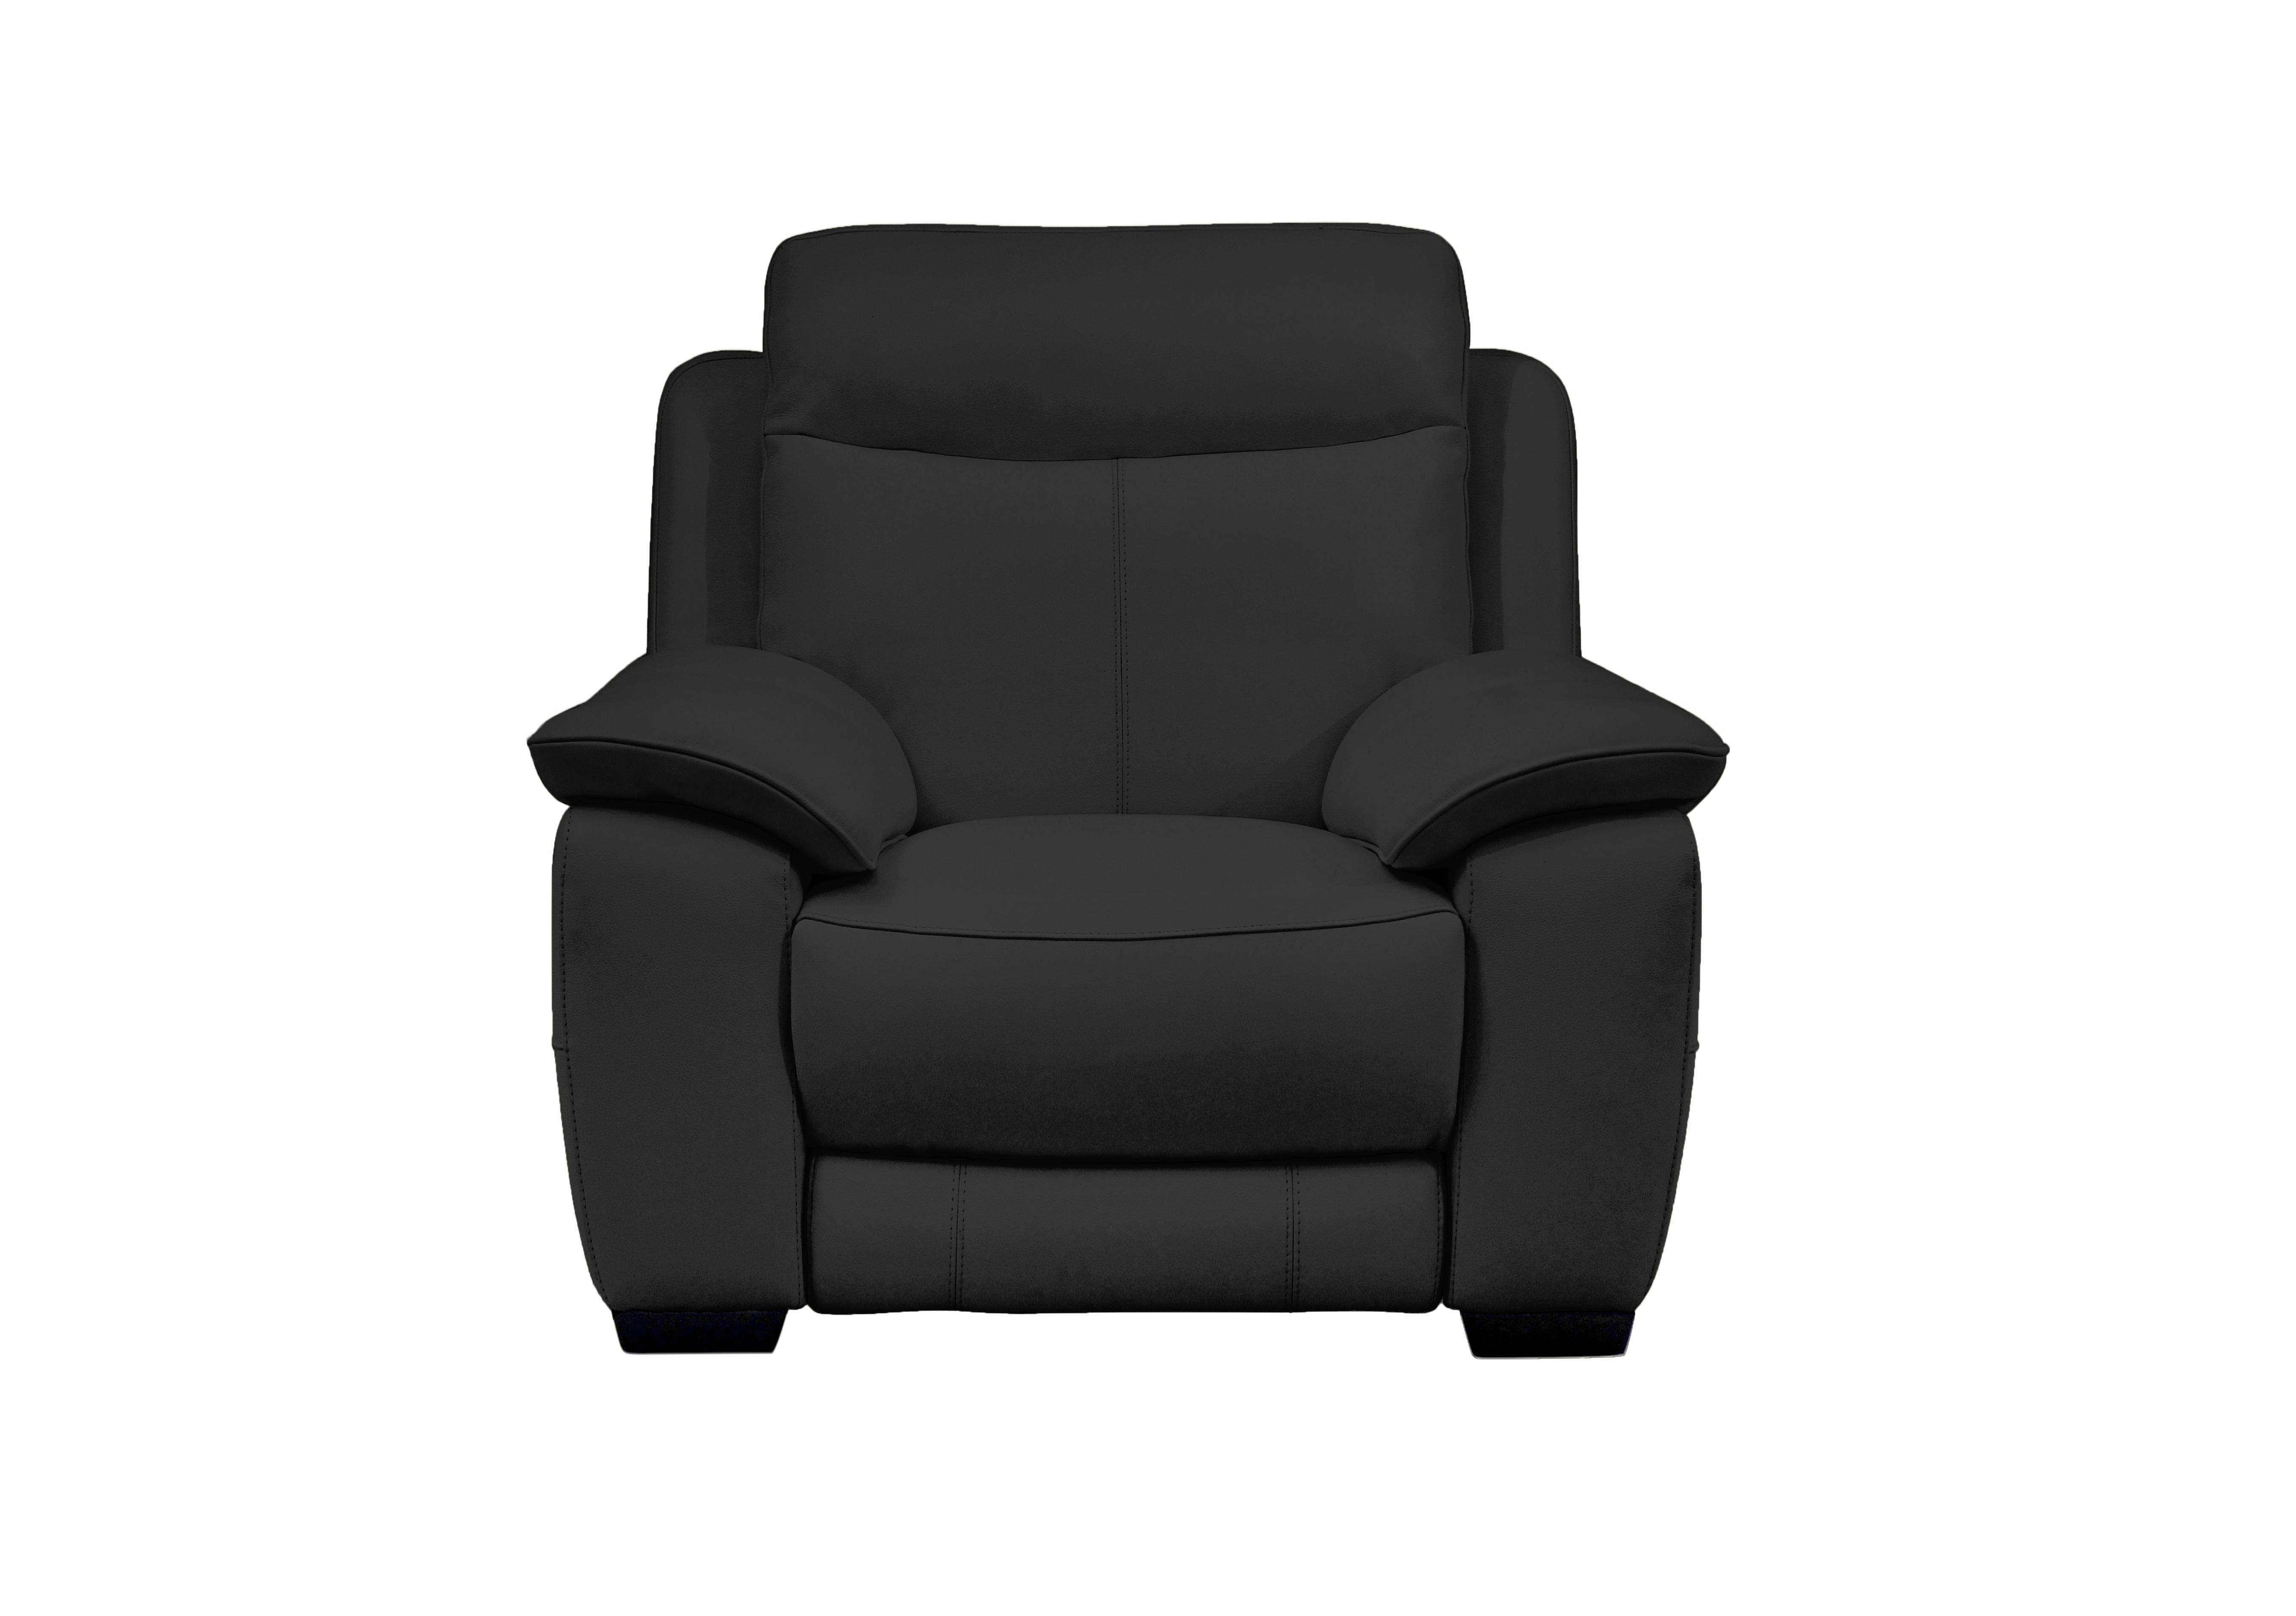 Starlight Express Leather Armchair in Bv-3500 Classic Black on Furniture Village